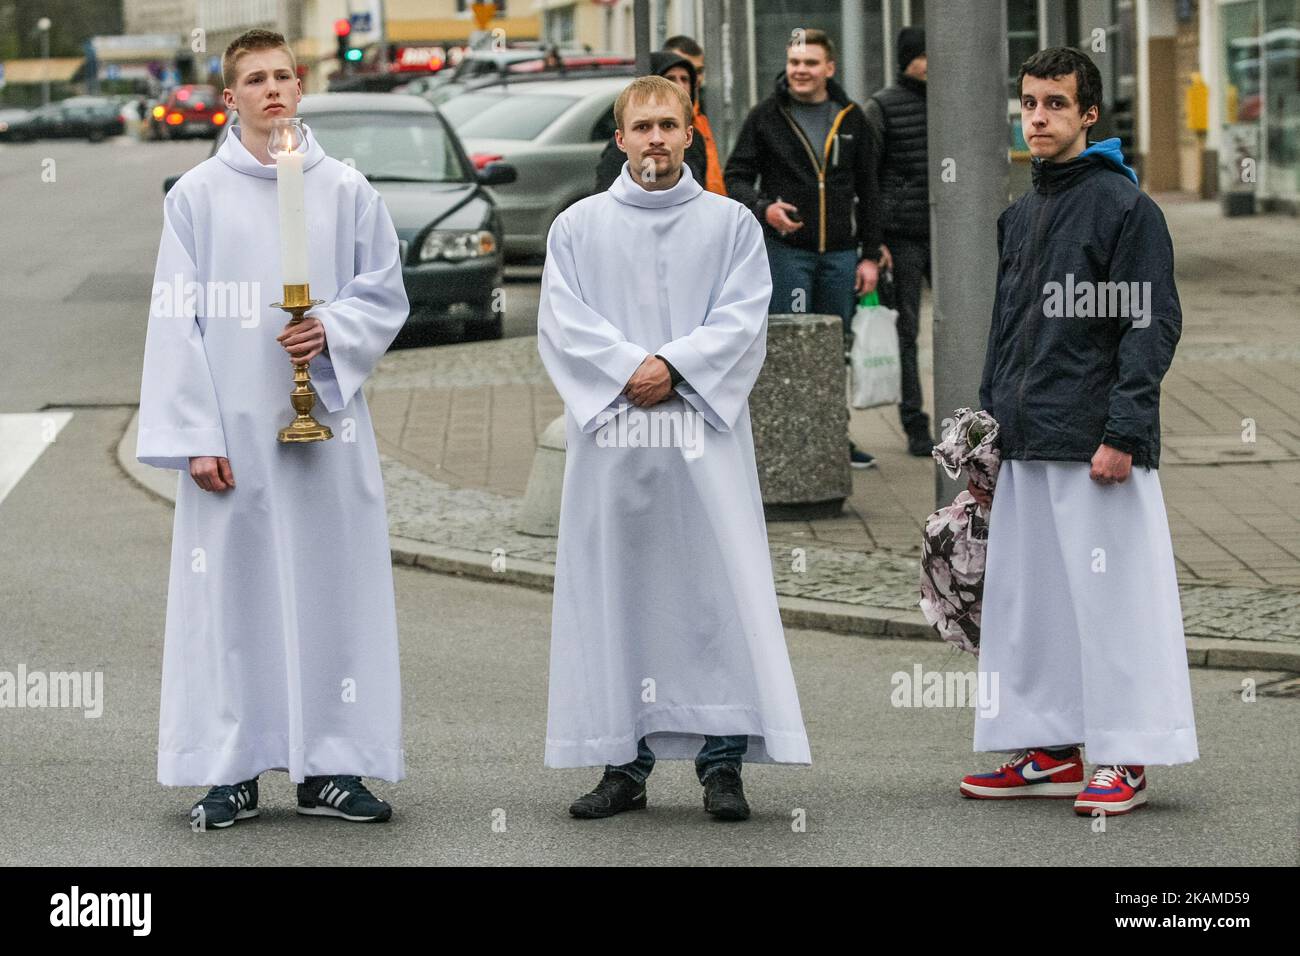 Acolytes attending the Way of the Cross procession are seen on 7 April 2017 in Gdynia, Poland. Way of the Cross also known as Way of Sorrows or Via Crucis processions are usually observed during Lent, especially on Lenten Fridays and most importantly on Good Friday. It is one of the most popular devotions for Roman Catholics. The devotion consists of meditating on 14 events which form the 14 stations of the cross. The purpose of this devotion is to focus on the Passion of Jesus Christ. (Photo by Michal Fludra/NurPhoto) *** Please Use Credit from Credit Field *** Stock Photo